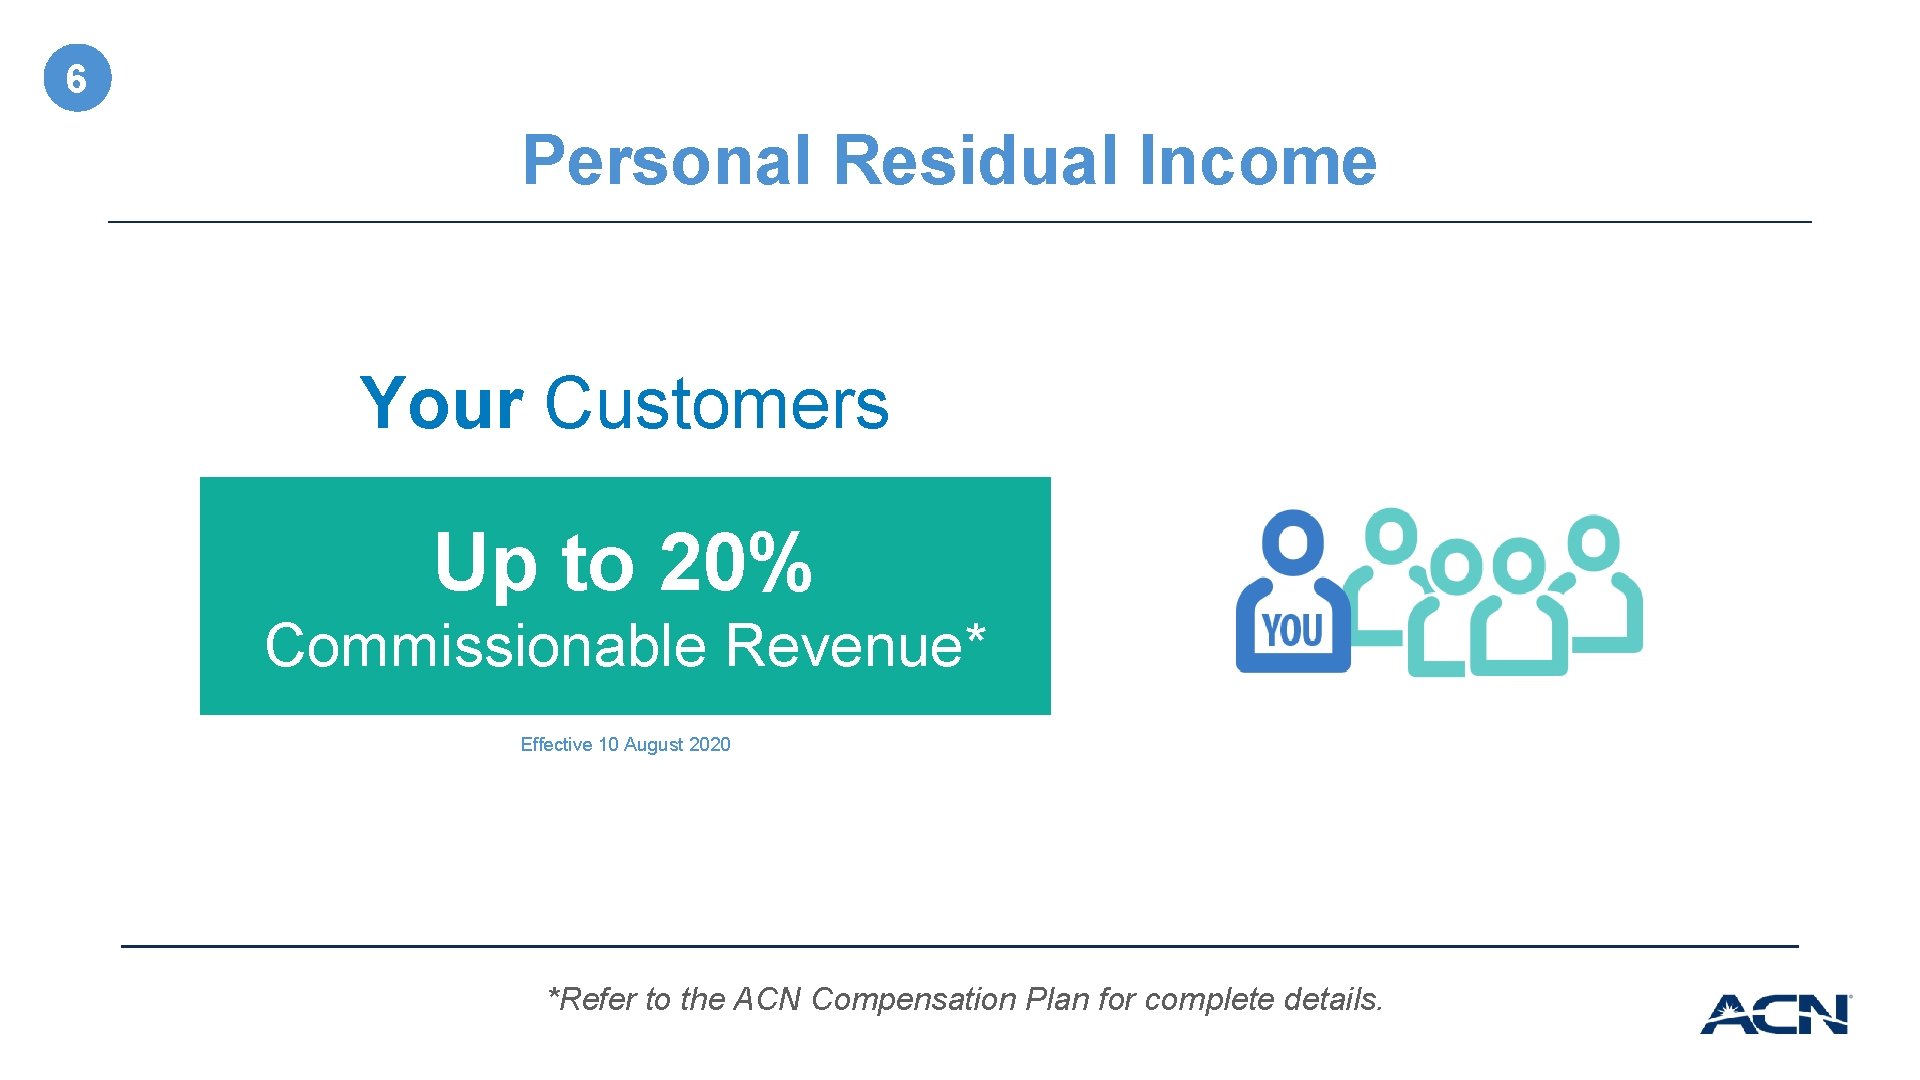 6 Personal Residual Income Your Customers Up to 20% Commissionable Revenue* Effective 10 August